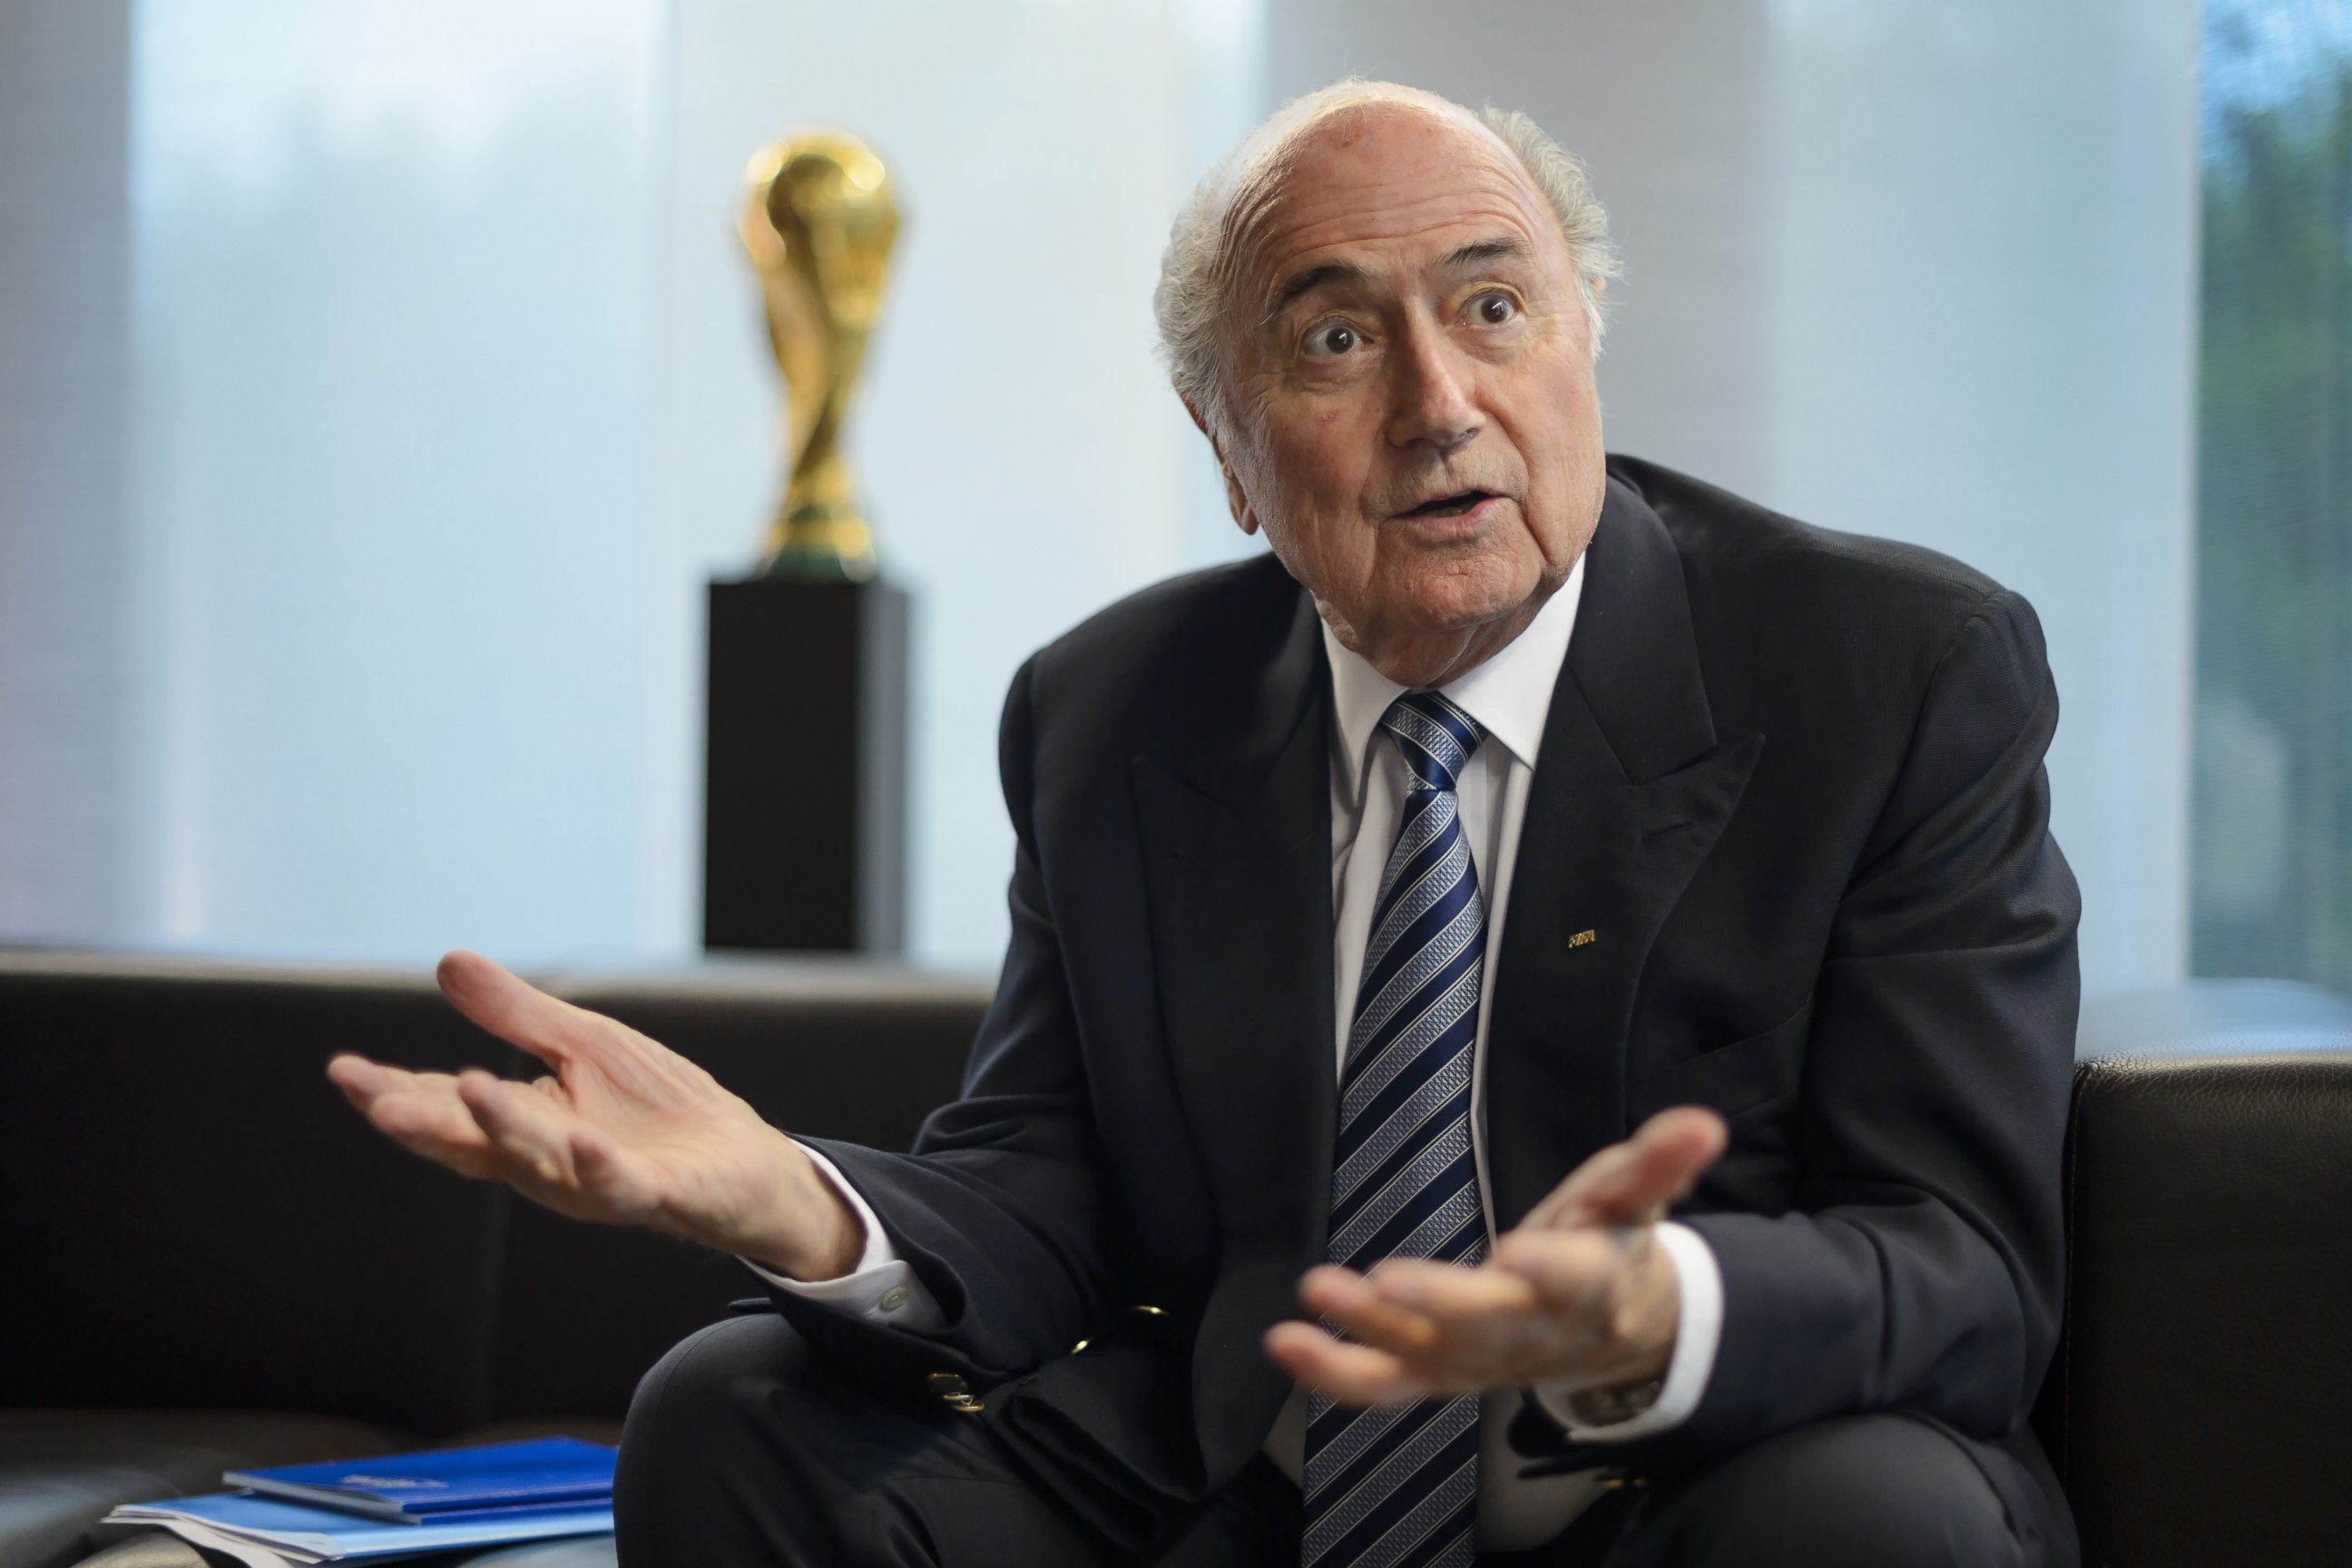 PHOTO: President of International governing body of association football FIFA Sepp Blatter gestures during an interview on May 15, 2015 at the of organization's headquarters in Zurich.  